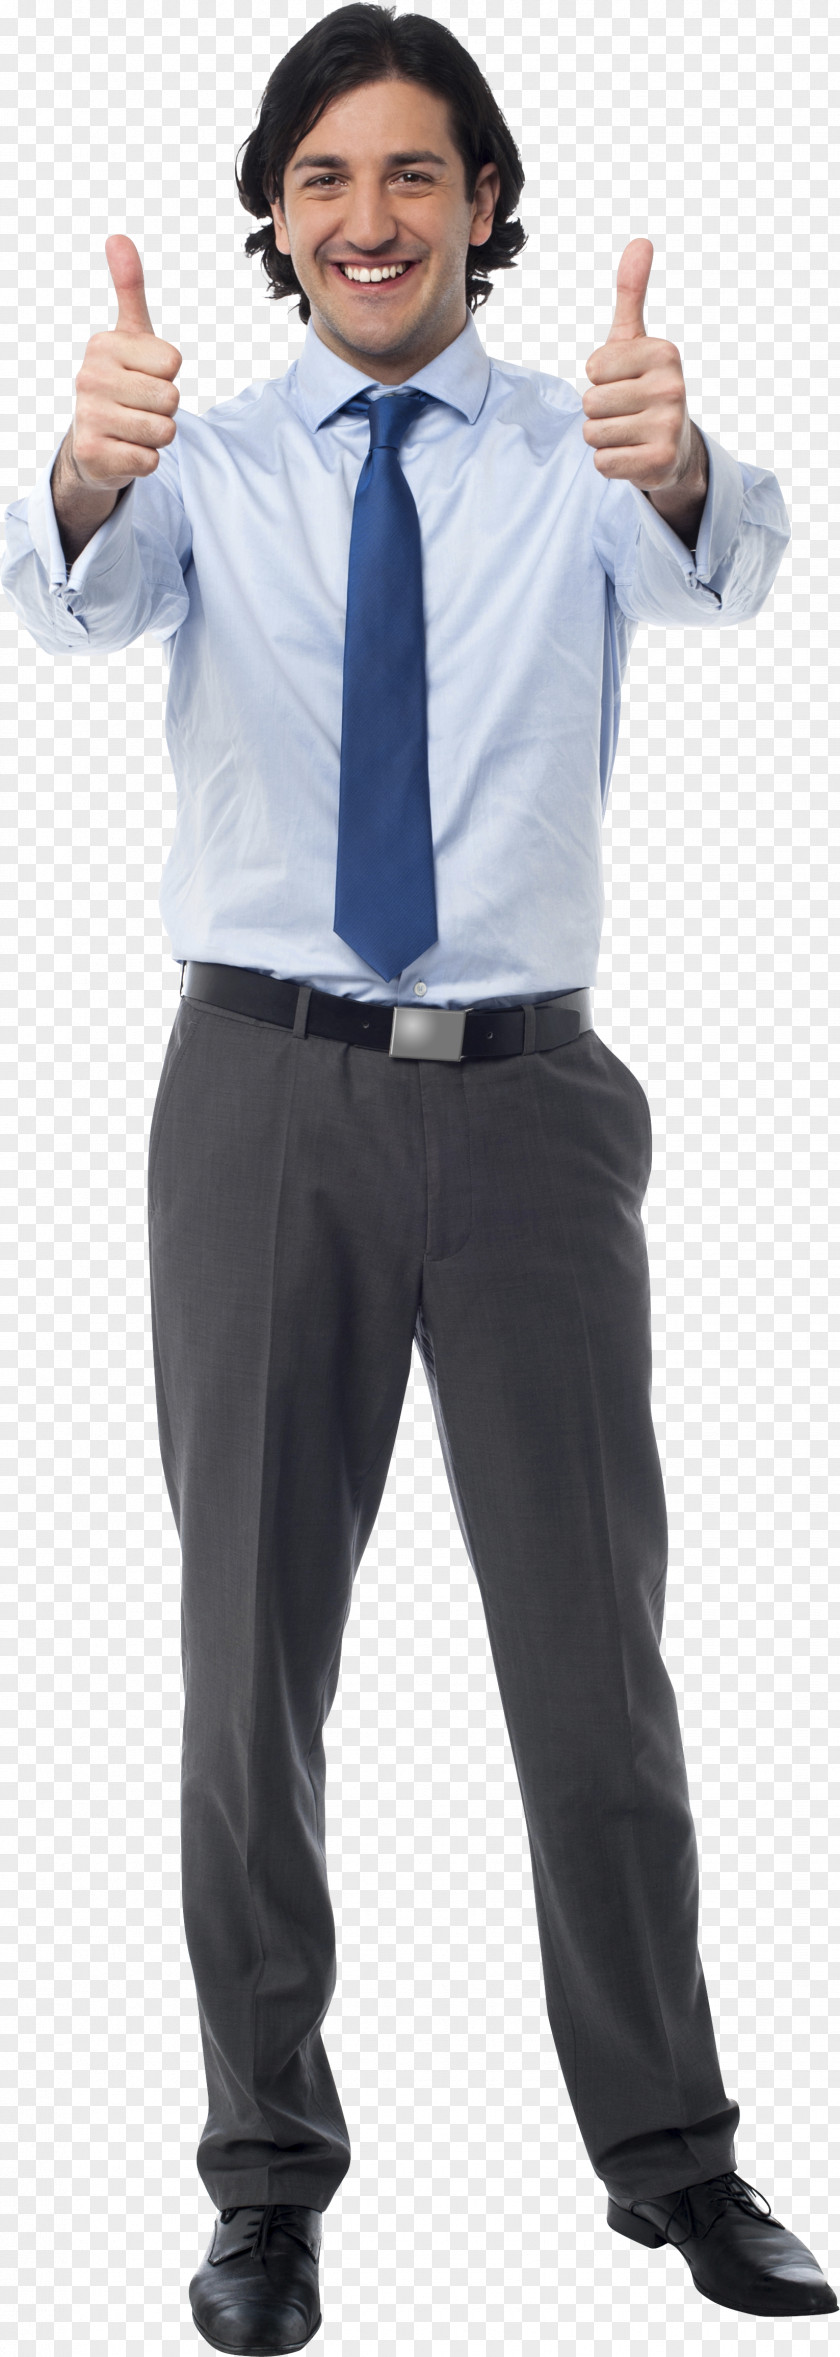 Business Casual Thumb Signal Gesture PNG